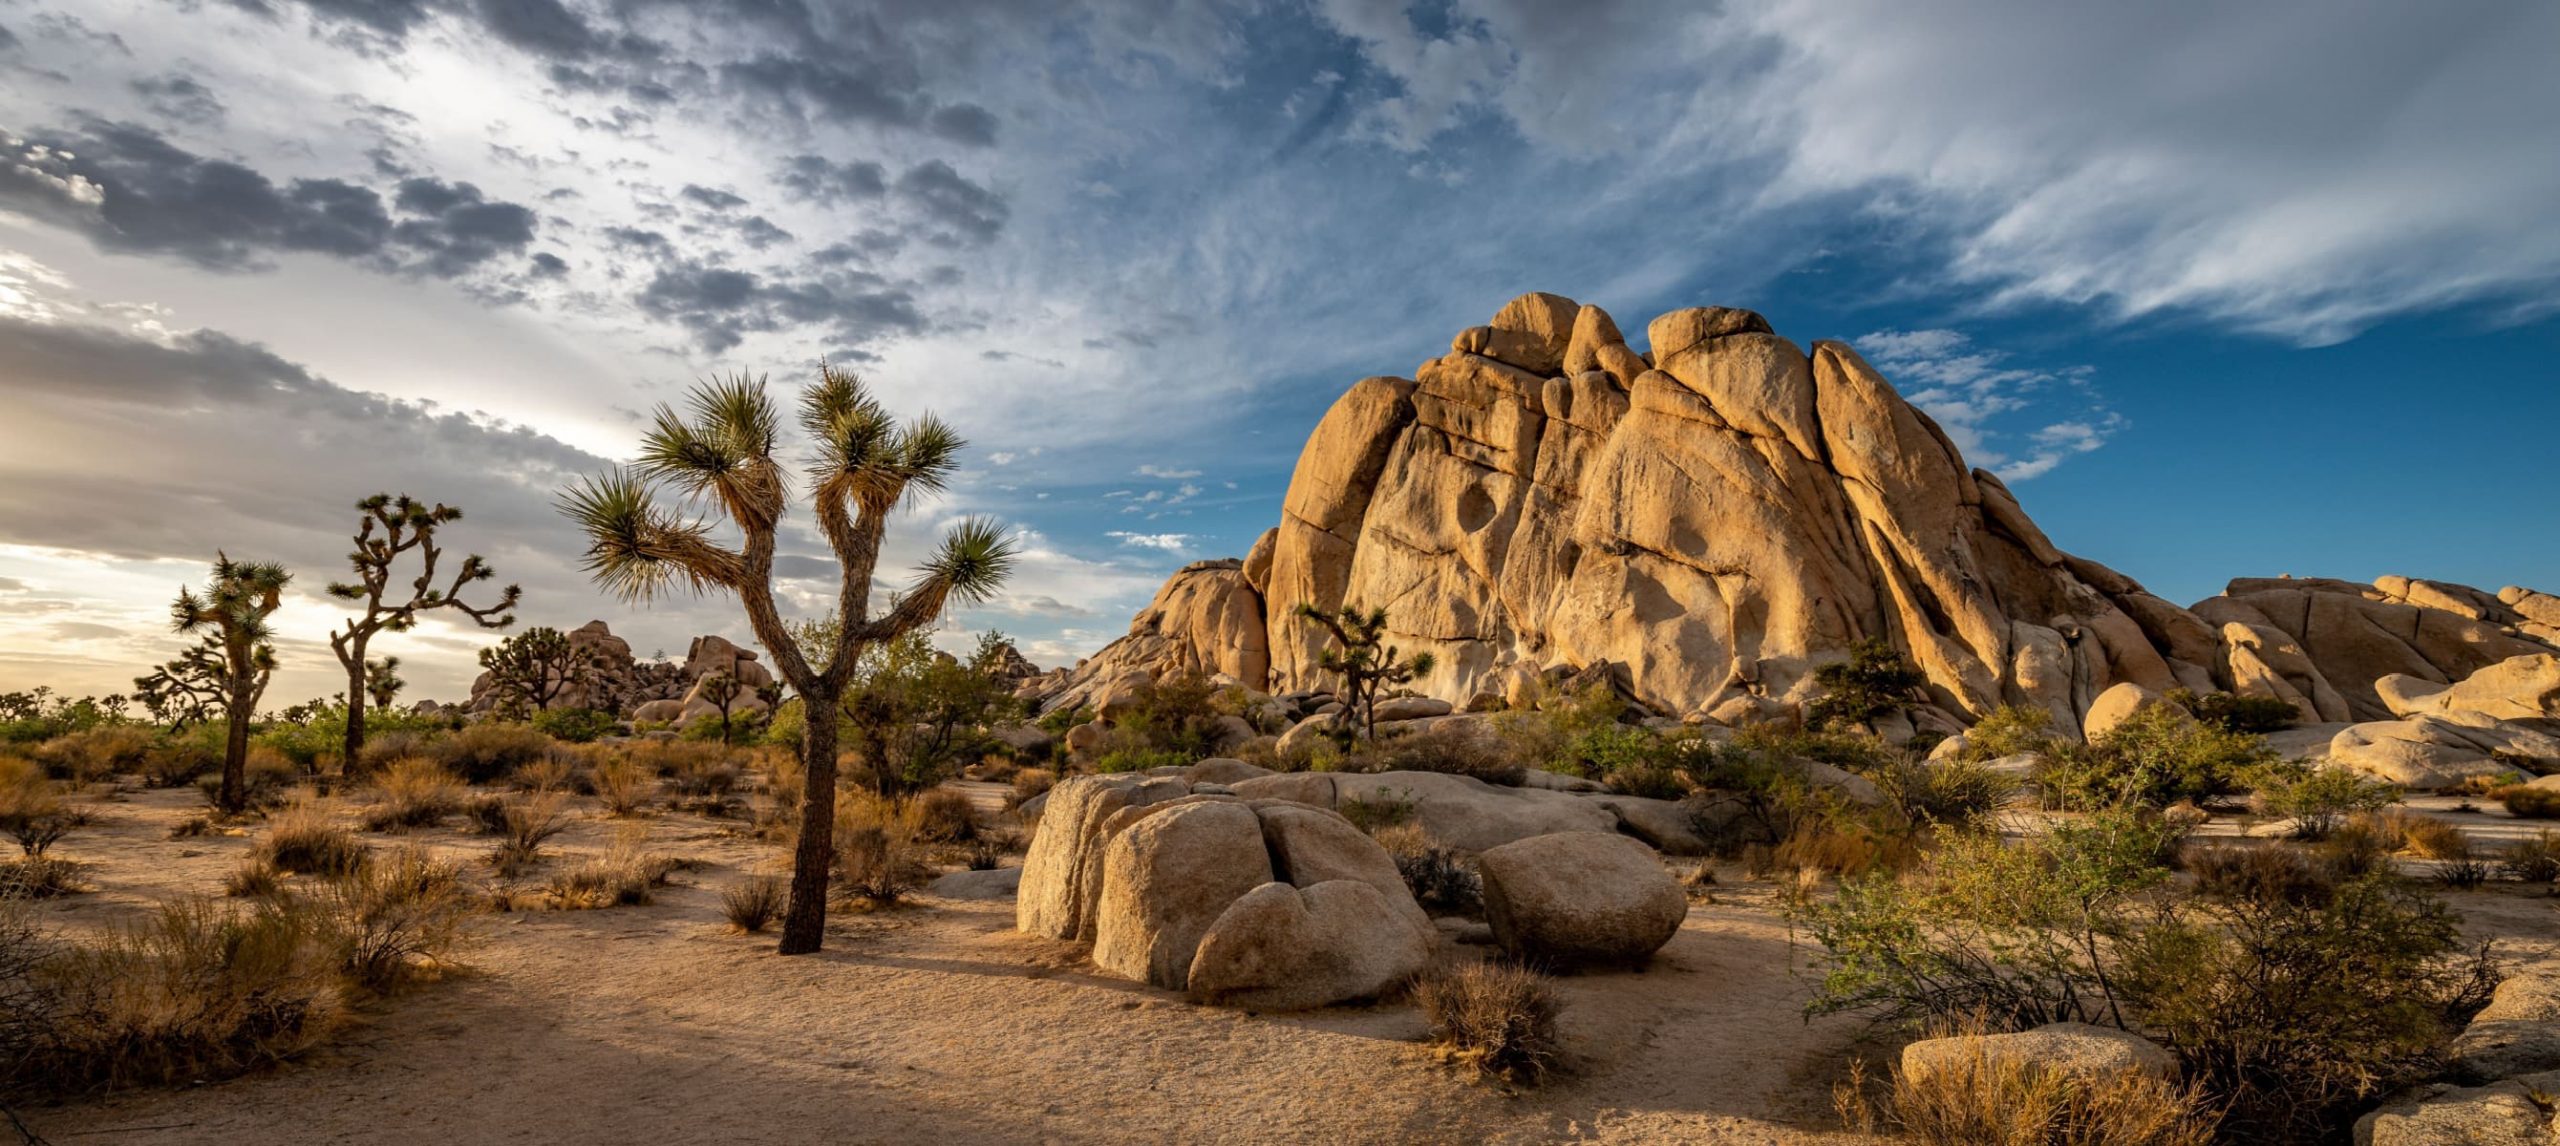 The Ultimate Guide To Visiting the Joshua Tree National Park, California